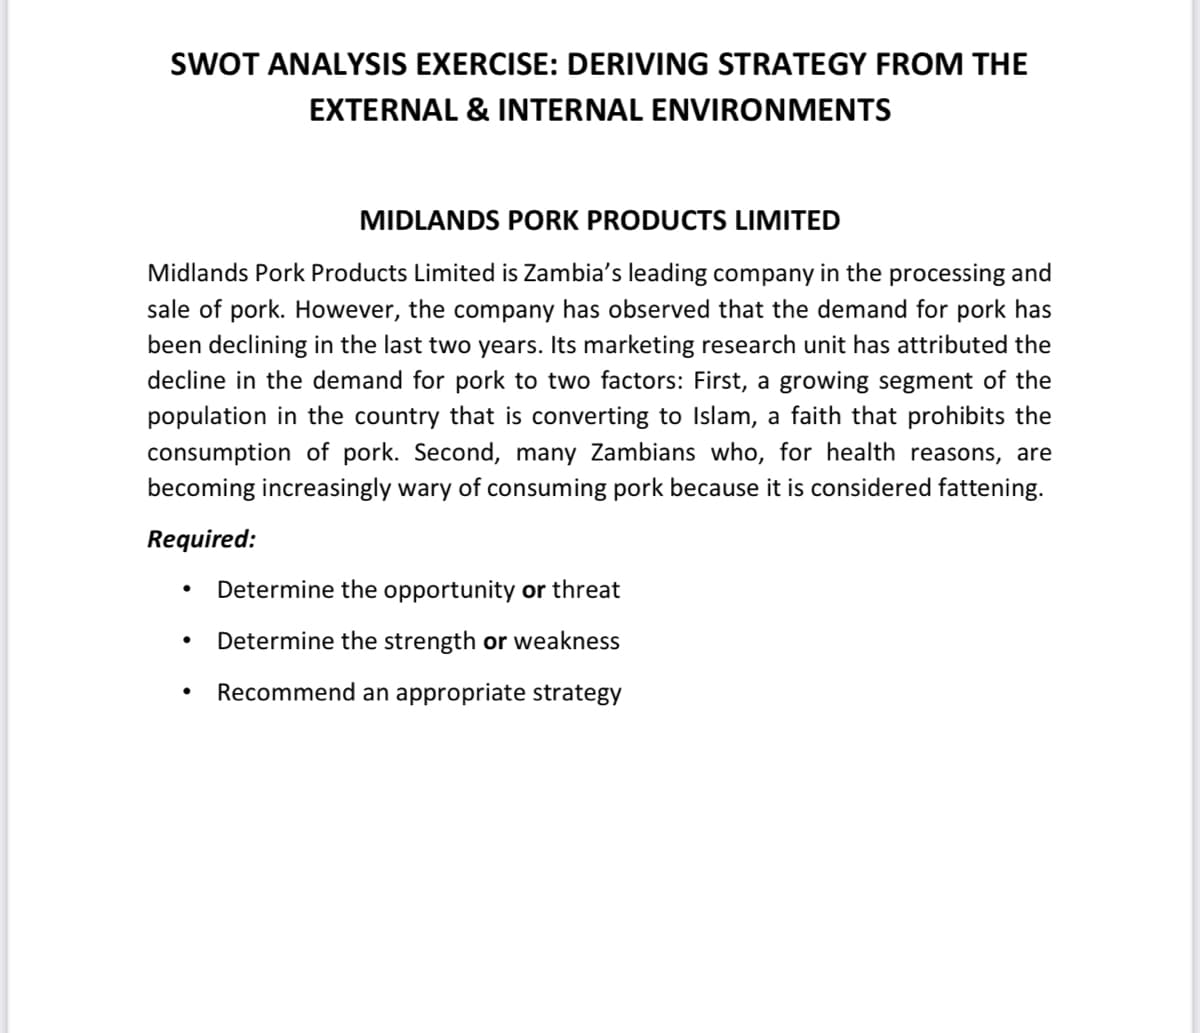 SWOT ANALYSIS EXERCISE: DERIVING STRATEGY FROM THE
EXTERNAL & INTERNAL ENVIRONMENTS
MIDLANDS PORK PRODUCTS LIMITED
Midlands Pork Products Limited is Zambia's leading company in the processing and
sale of pork. However, the company has observed that the demand for pork has
been declining in the last two years. Its marketing research unit has attributed the
decline in the demand for pork to two factors: First, a growing segment of the
population in the country that is converting to Islam, a faith that prohibits the
consumption of pork. Second, many Zambians who, for health reasons, are
becoming increasingly wary of consuming pork because it is considered fattening.
Required:
Determine the opportunity or threat
Determine the strength or weakness
Recommend an appropriate strategy